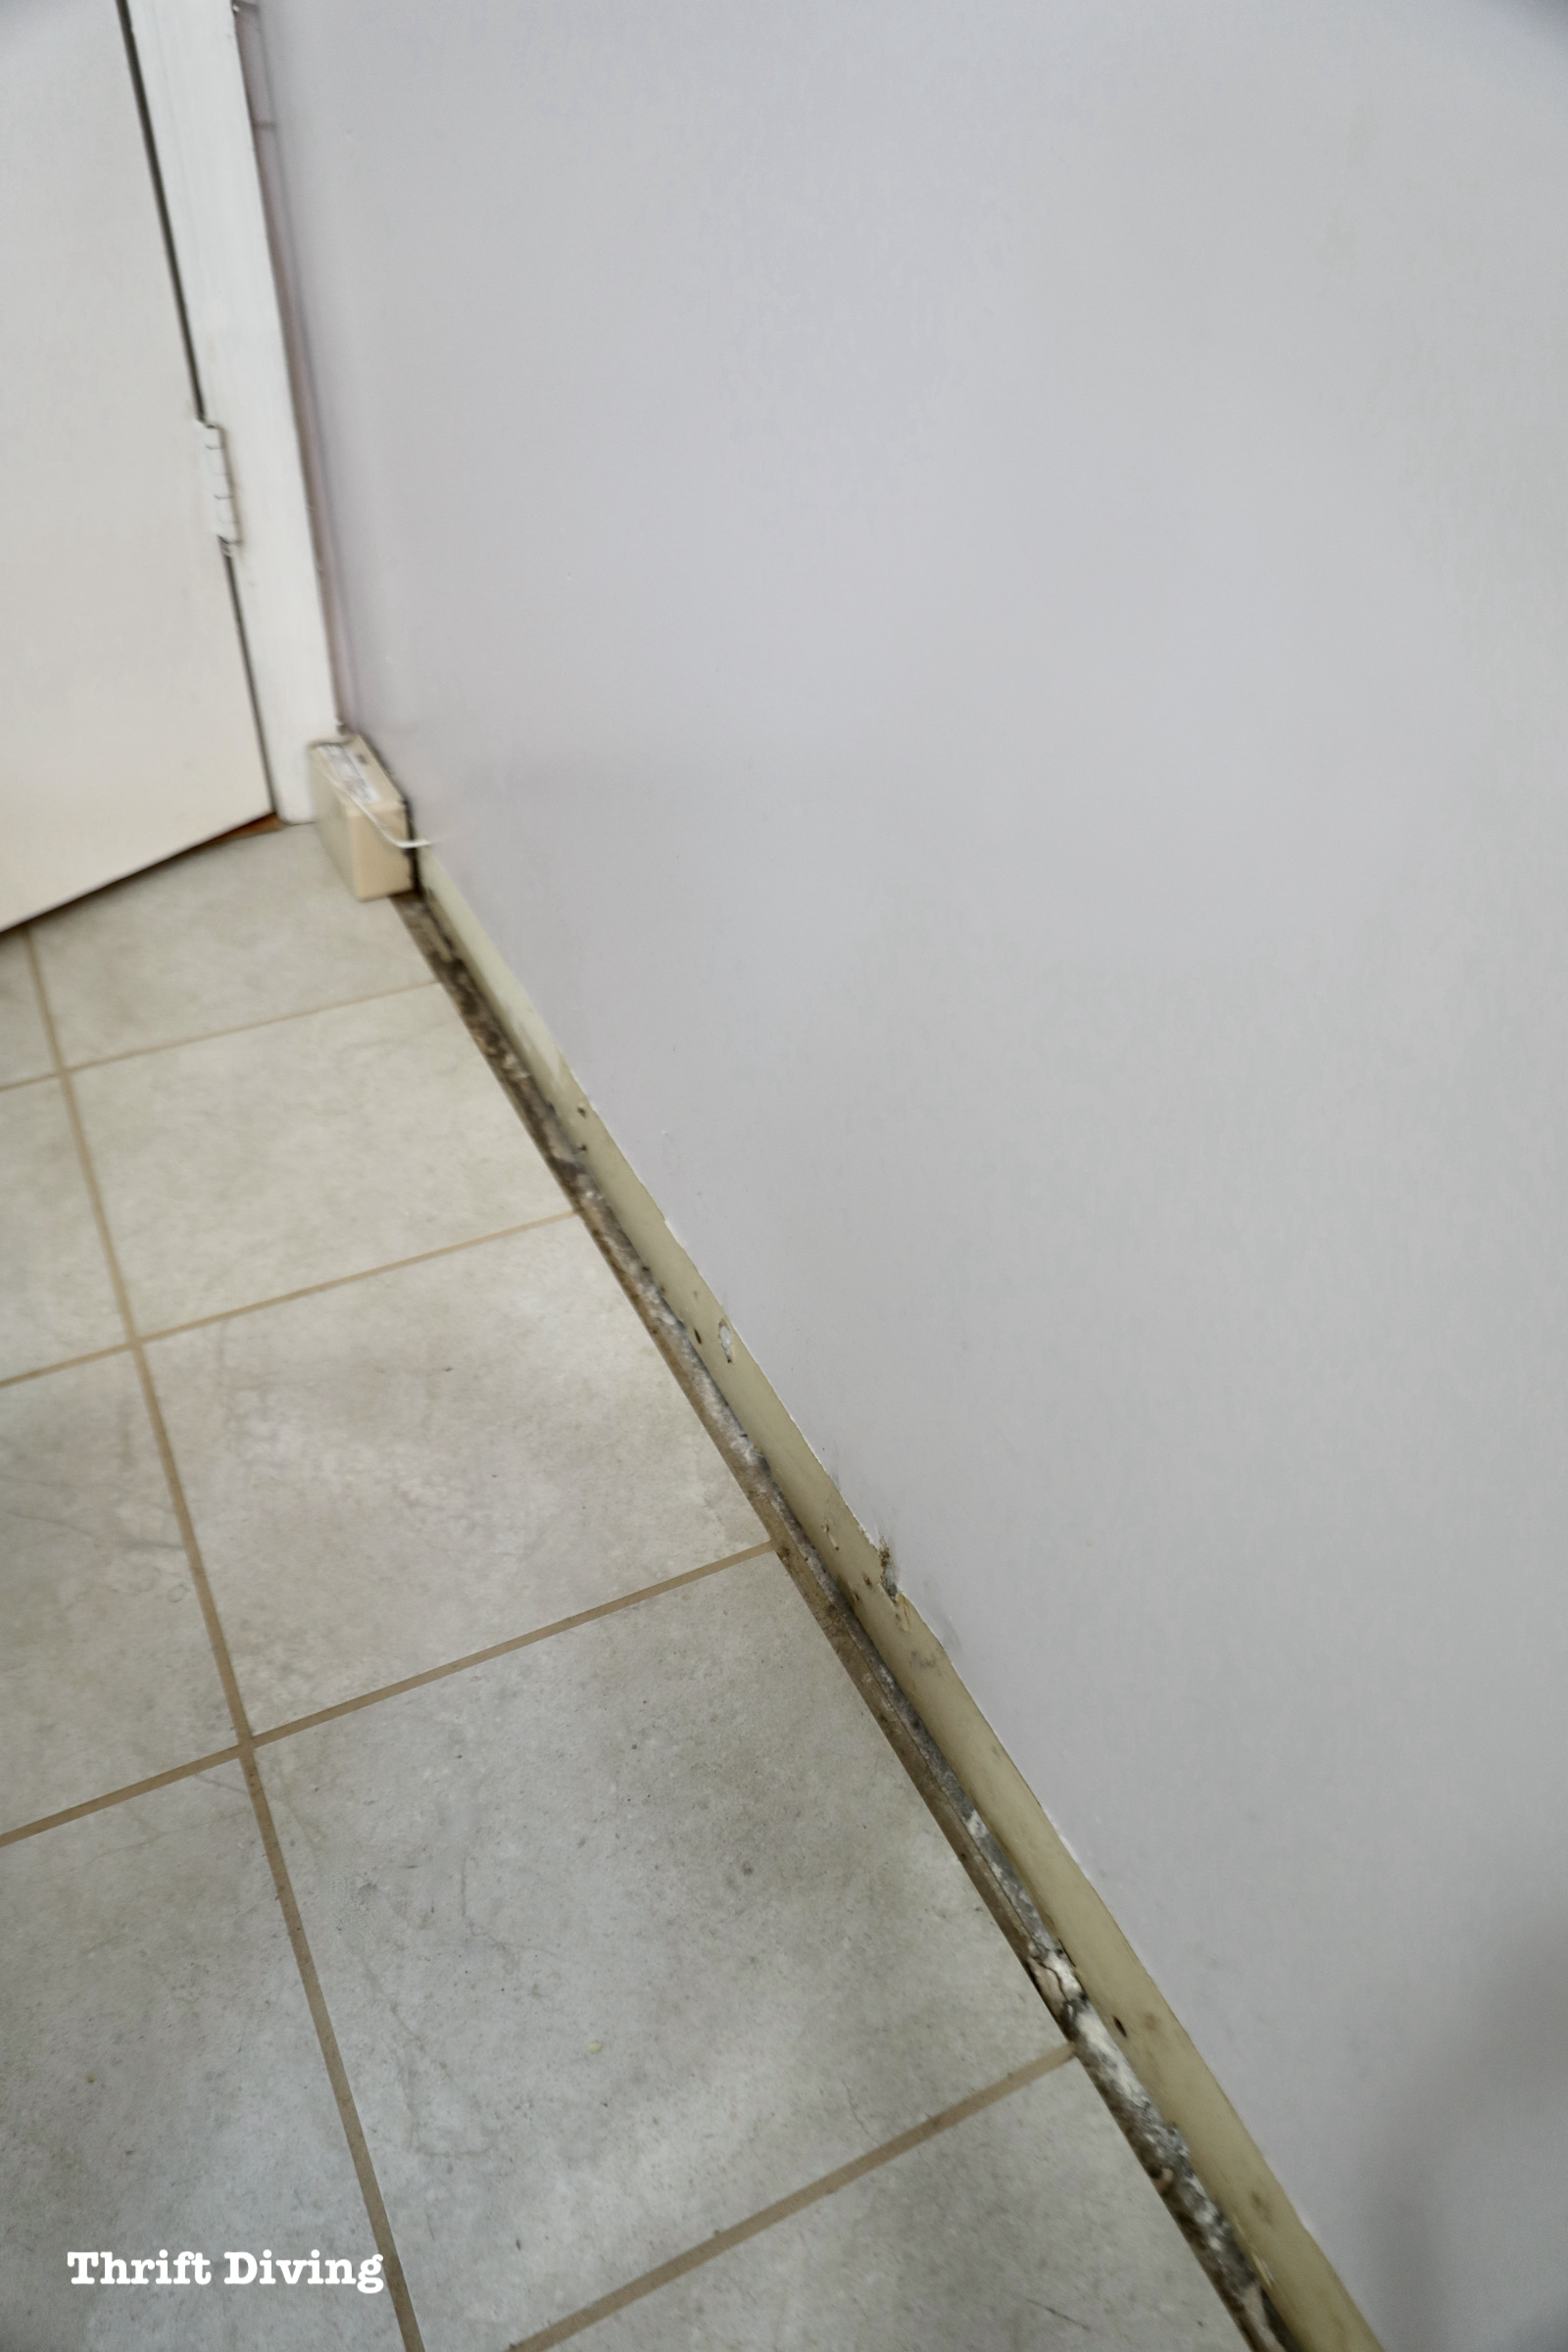 Having trouble finishing DIY projects? Gap between floor and wall. - Thrift Diving